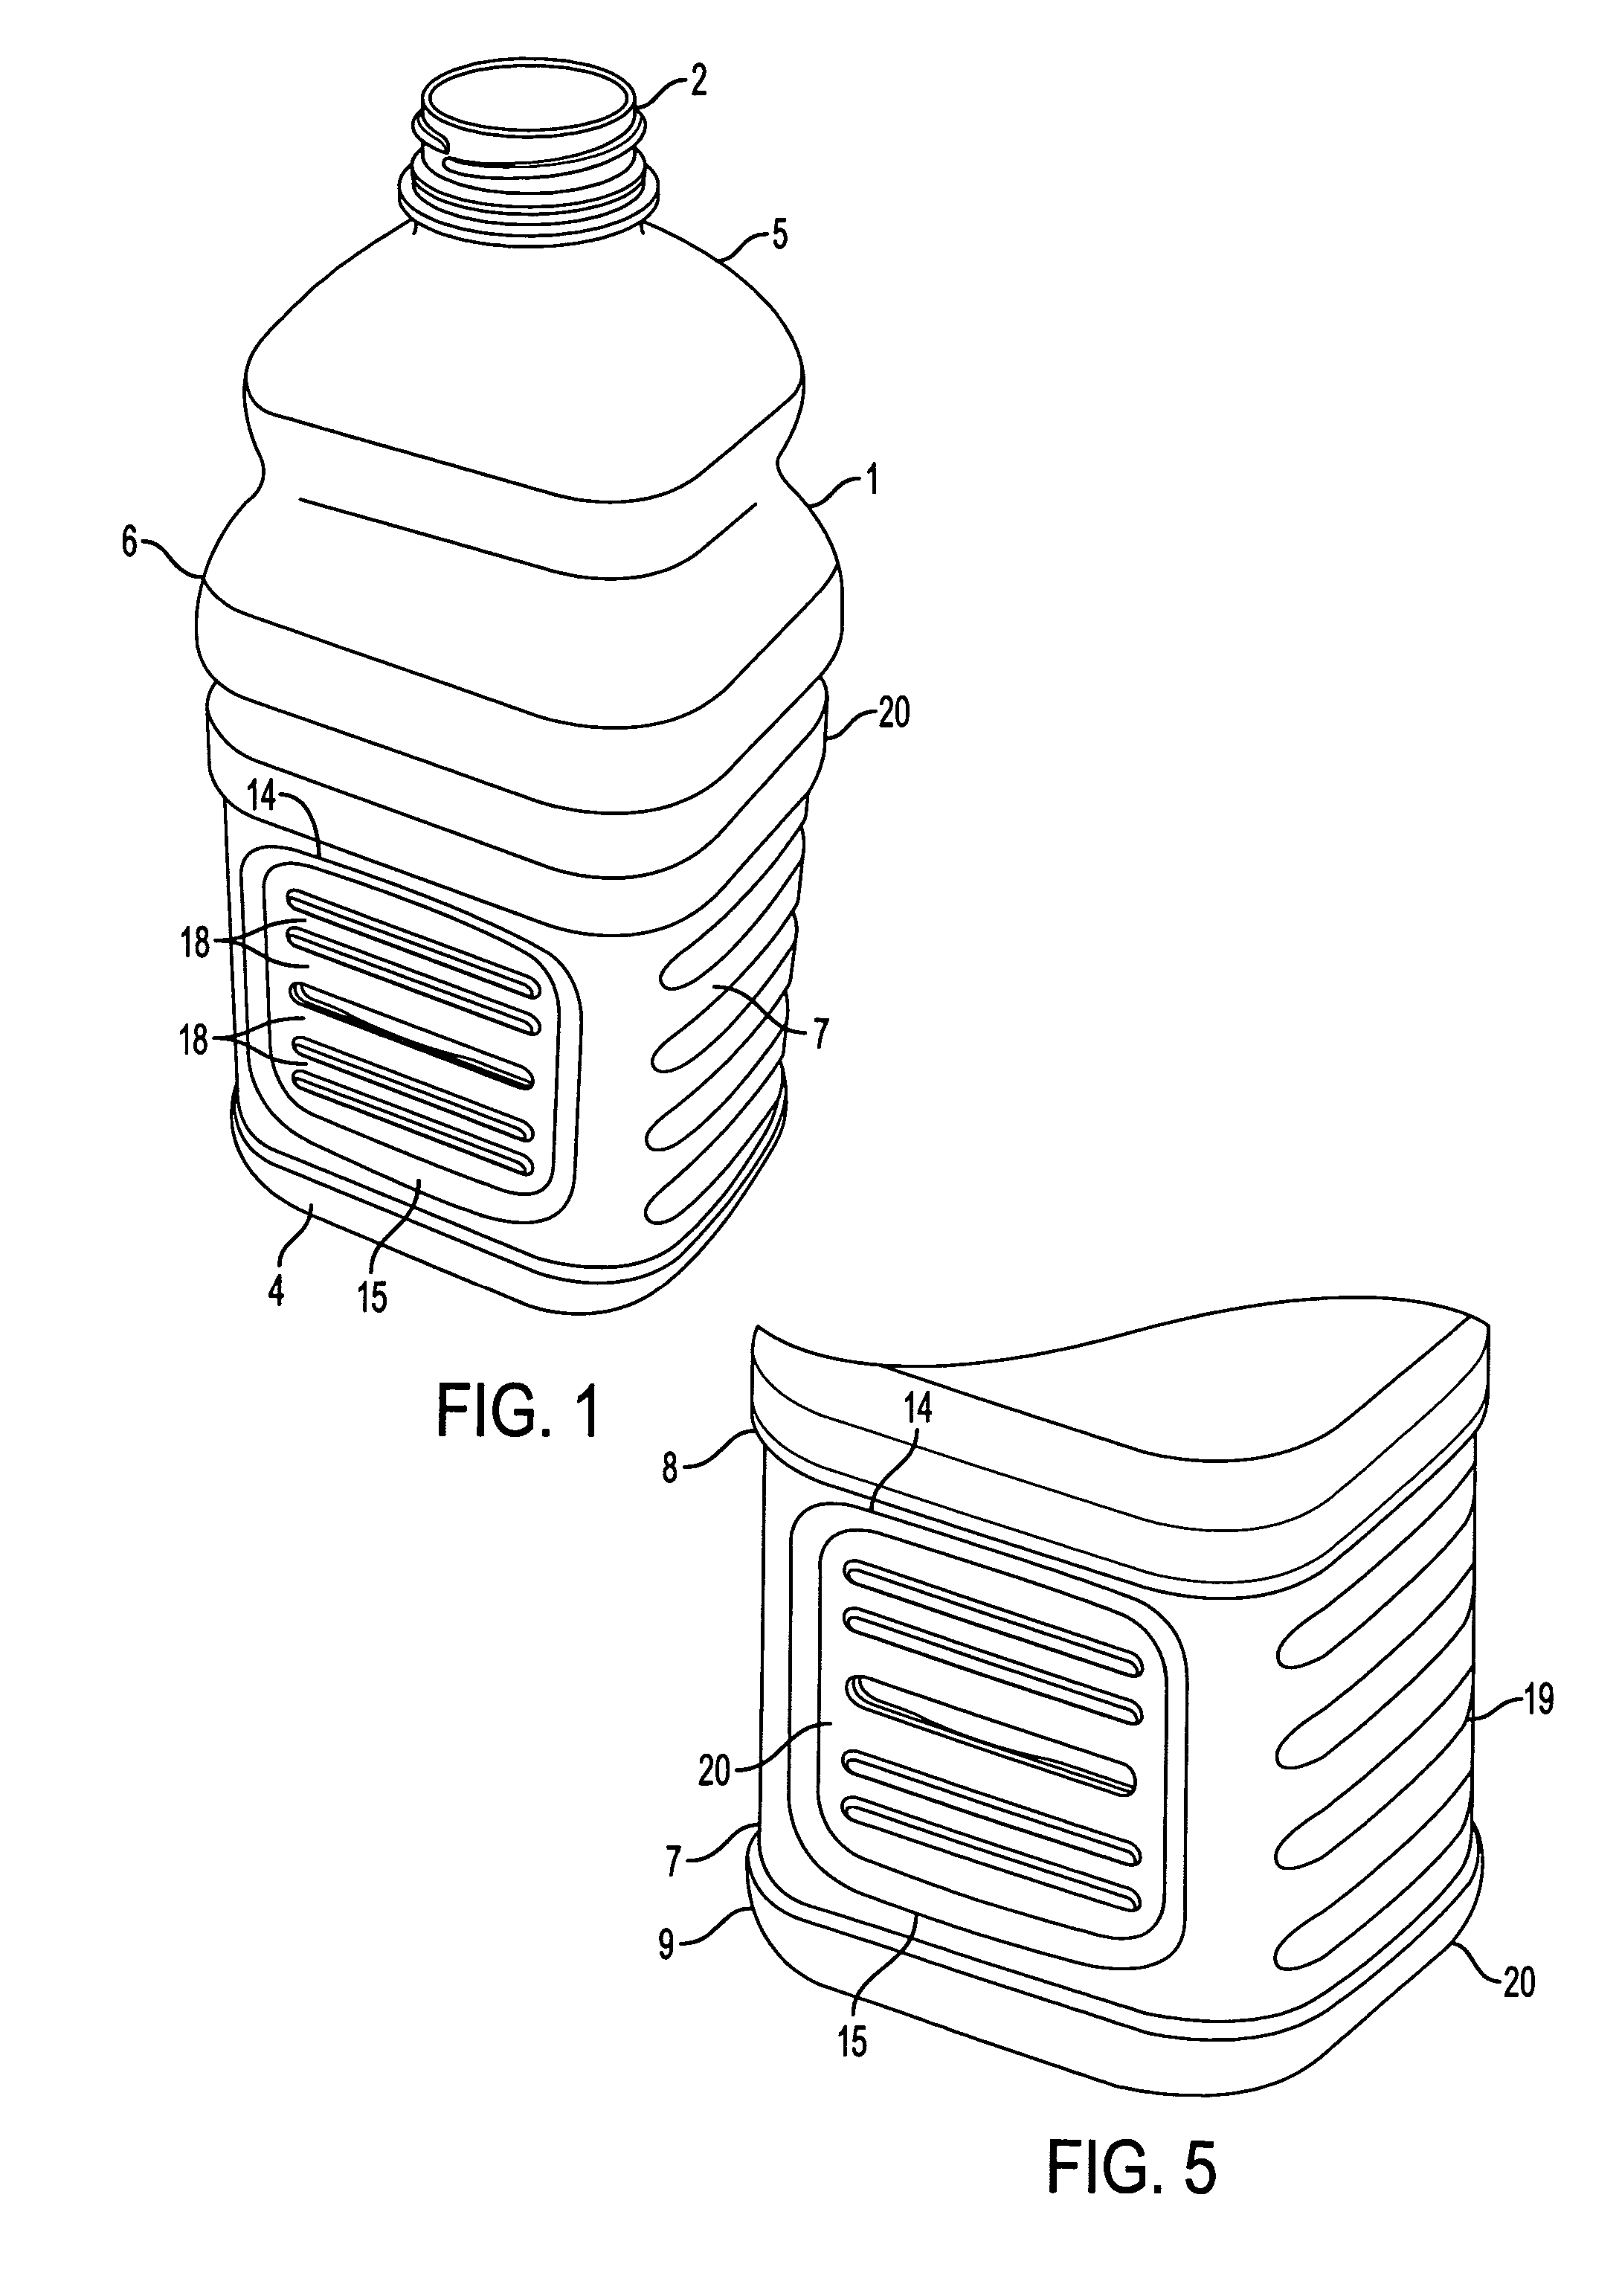 Opposing rib structure for non-round bottles